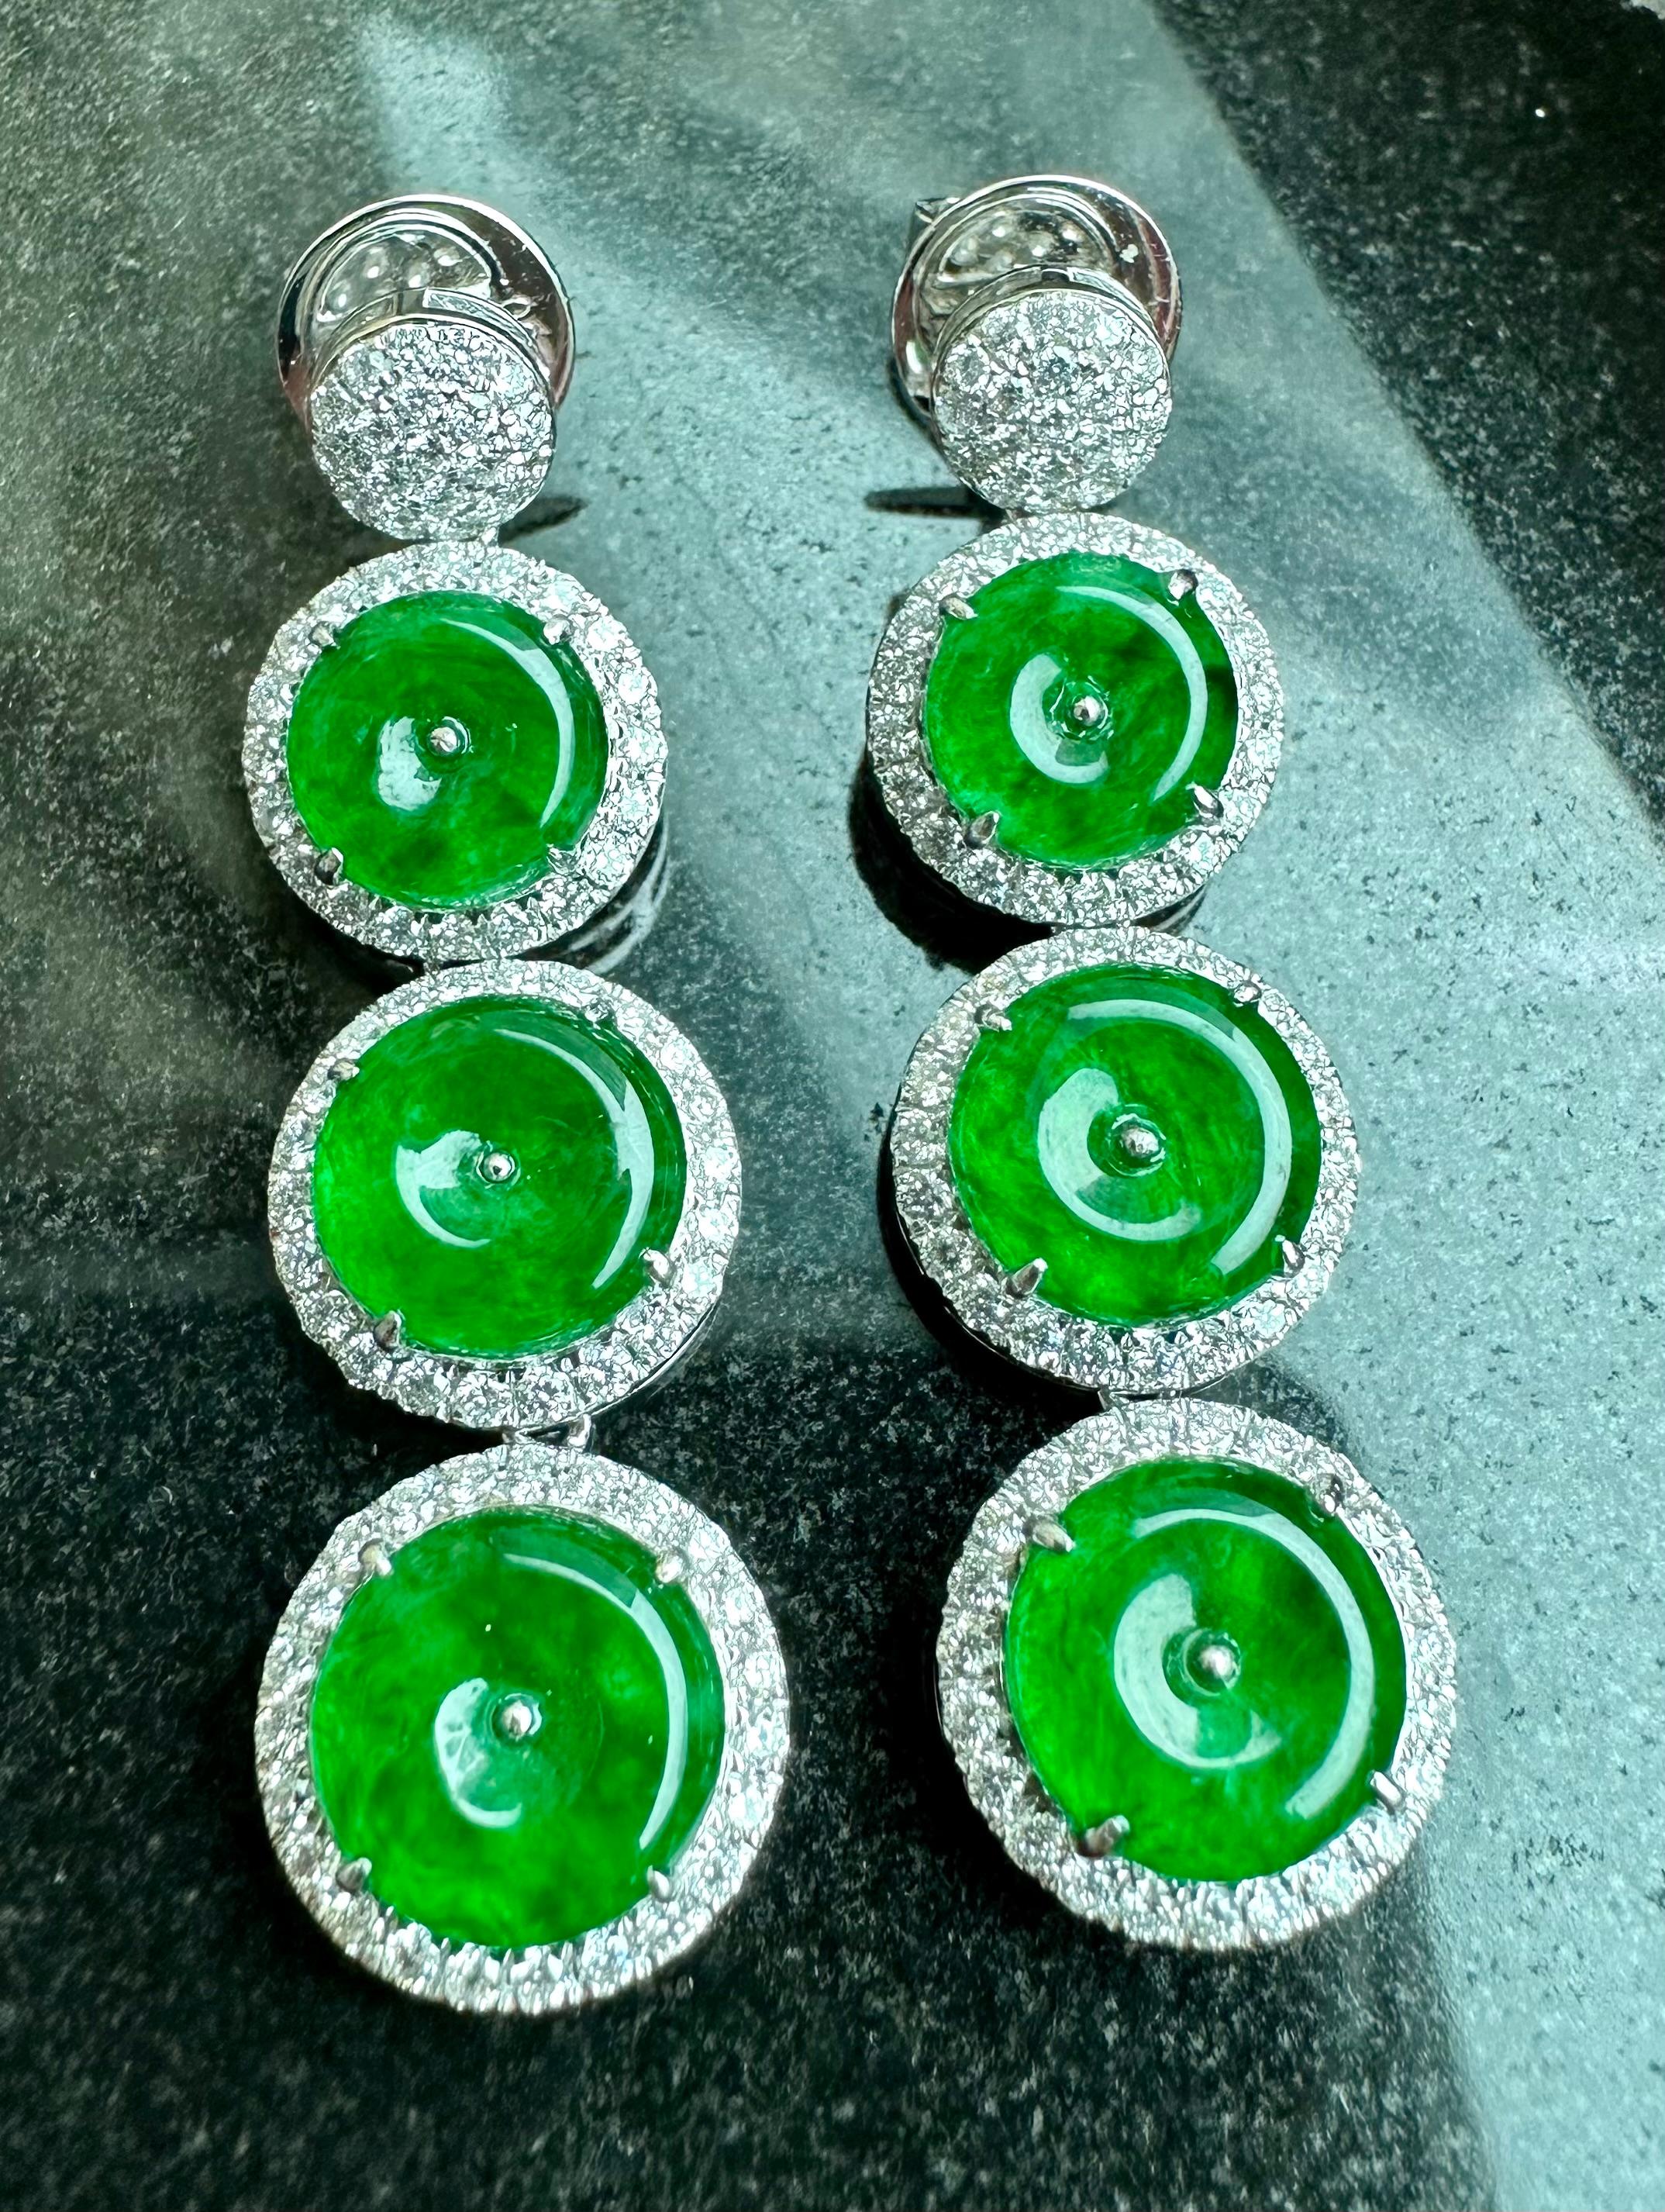 Round Cut Certified Natural Jade & Diamond Drop Earrings. Spinach & Imperial Green Color For Sale